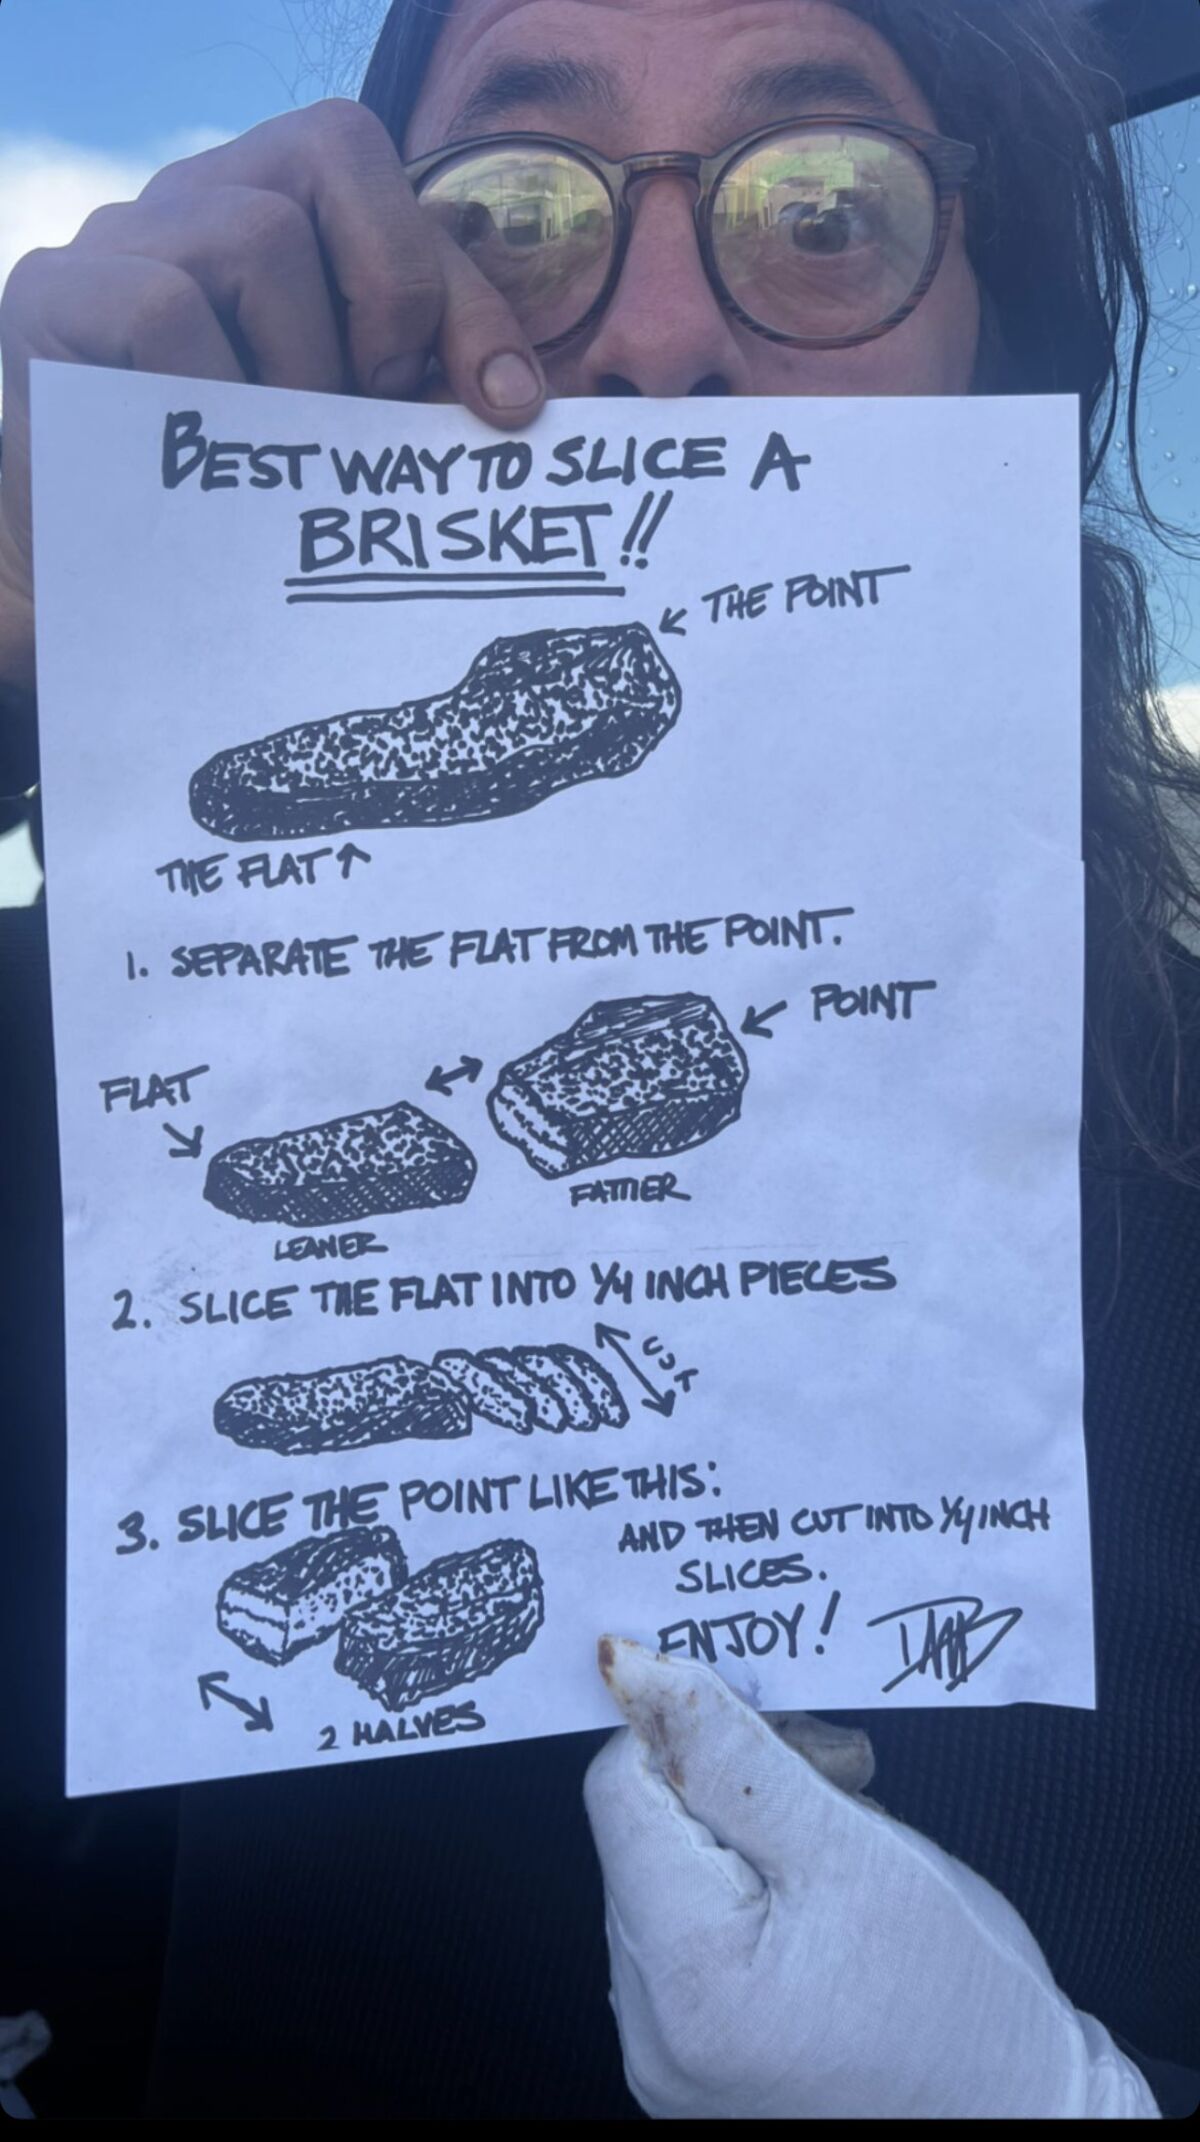 A man shows us his guide for brisket. 